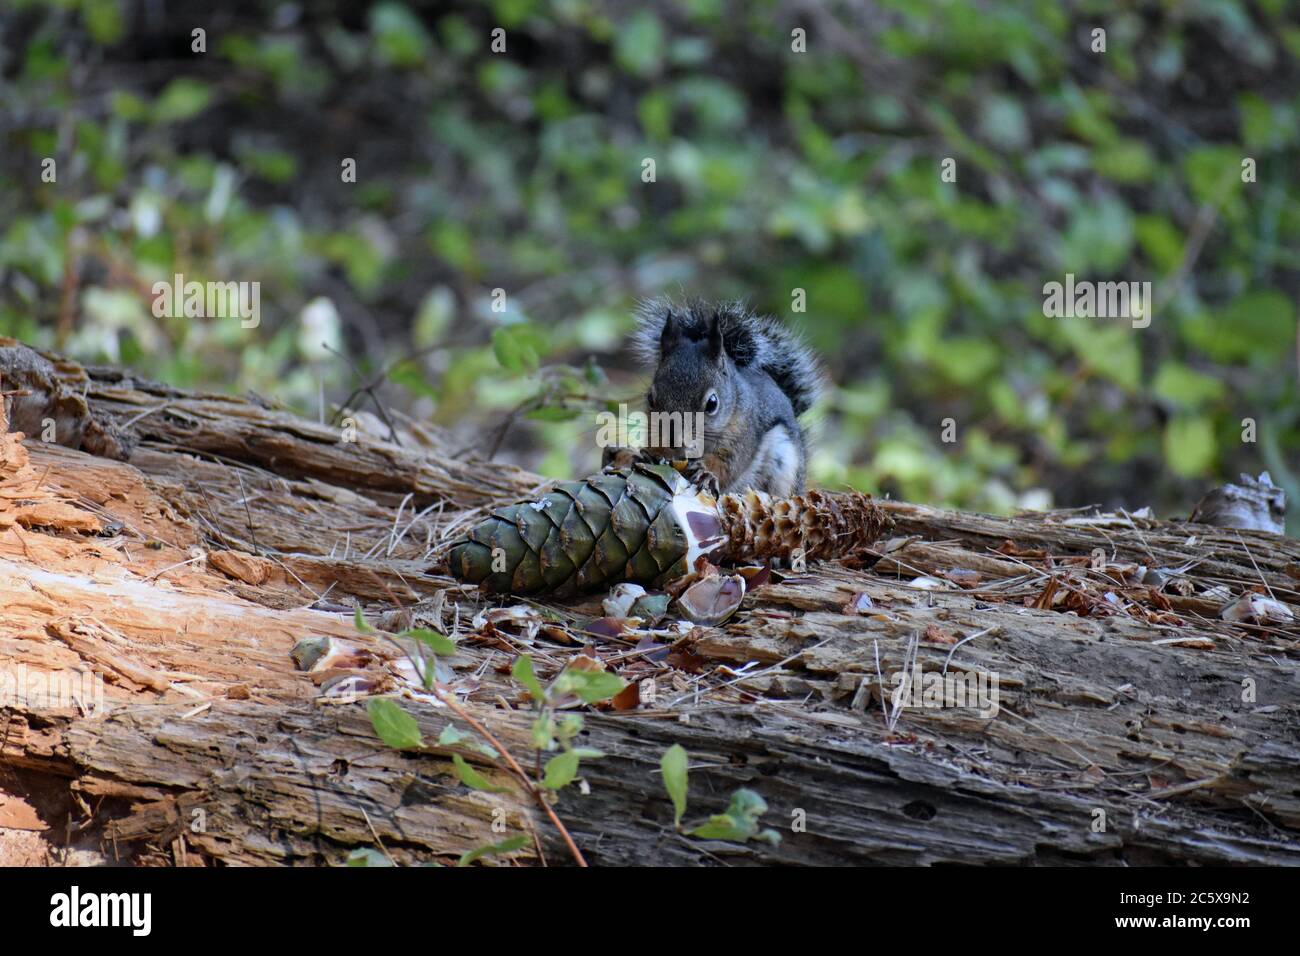 A squirrel (Sciuridae) eating a pine cone on a fallen toting Sequoia Tree (Sequoiadendron giganteum) along the big trees trail i Sequoia National Park. Stock Photo